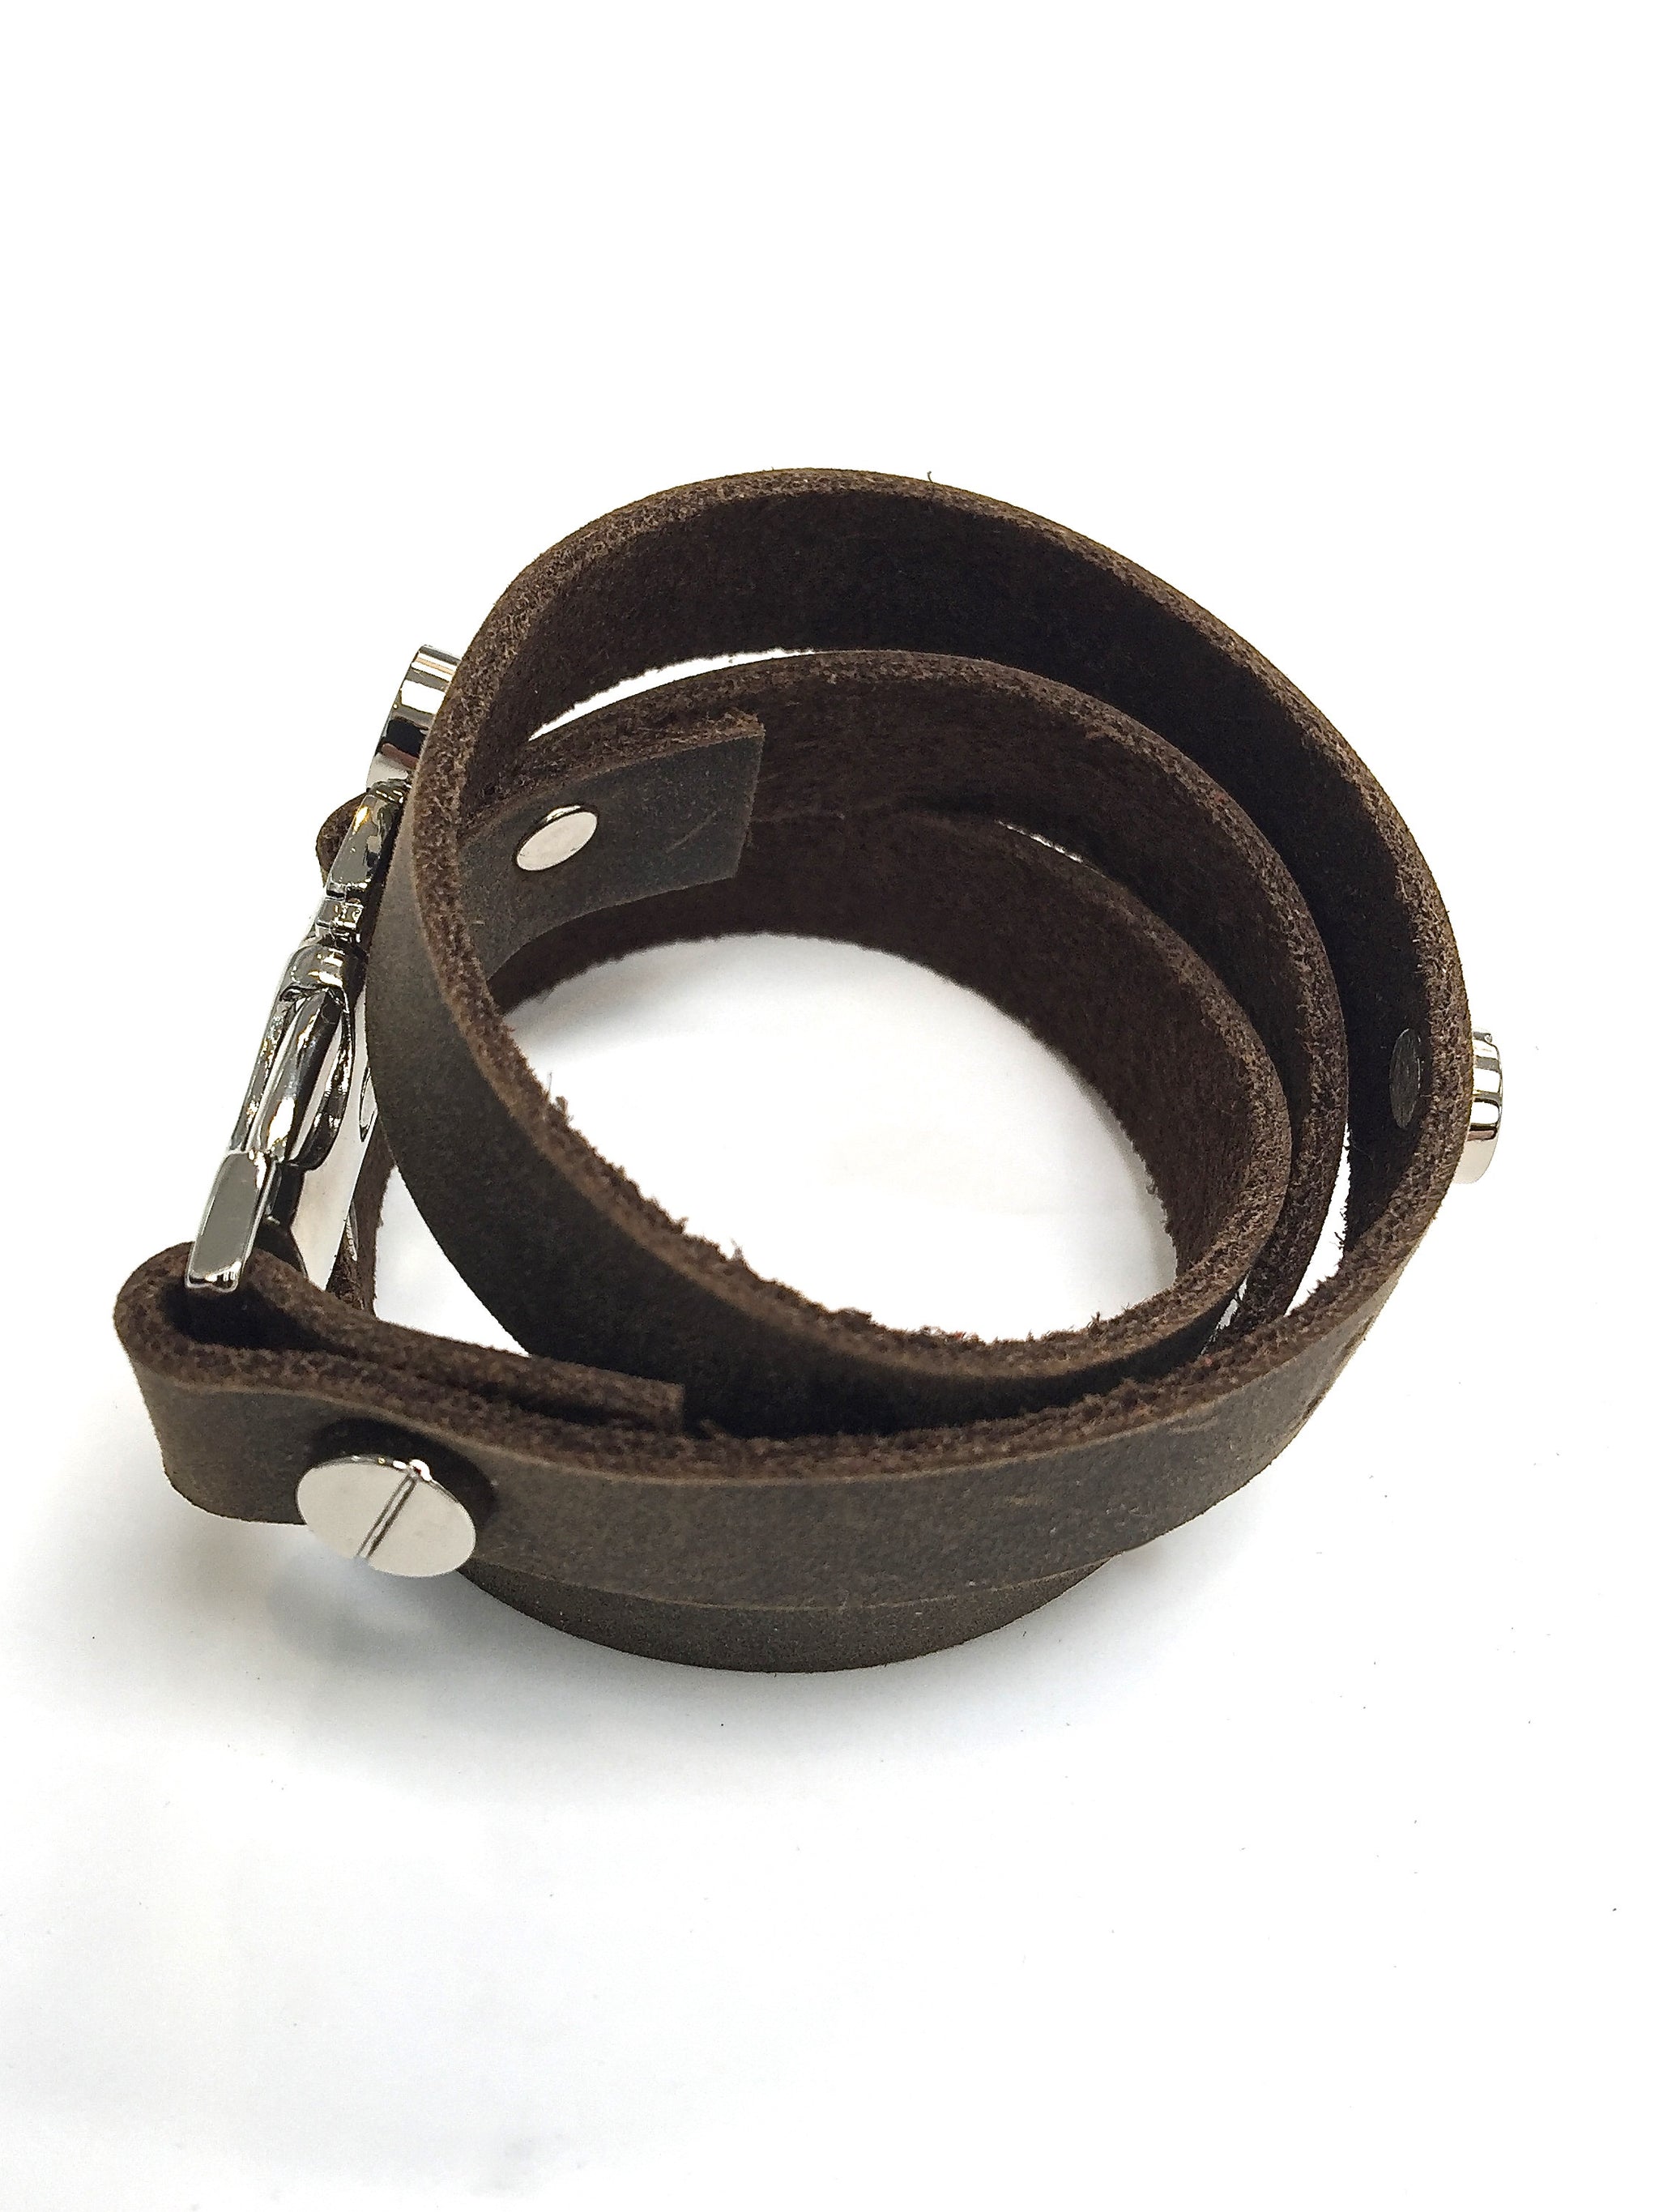 Quicksnap triple leather wraparound bracelet distressed utility by NYET jewelry leather